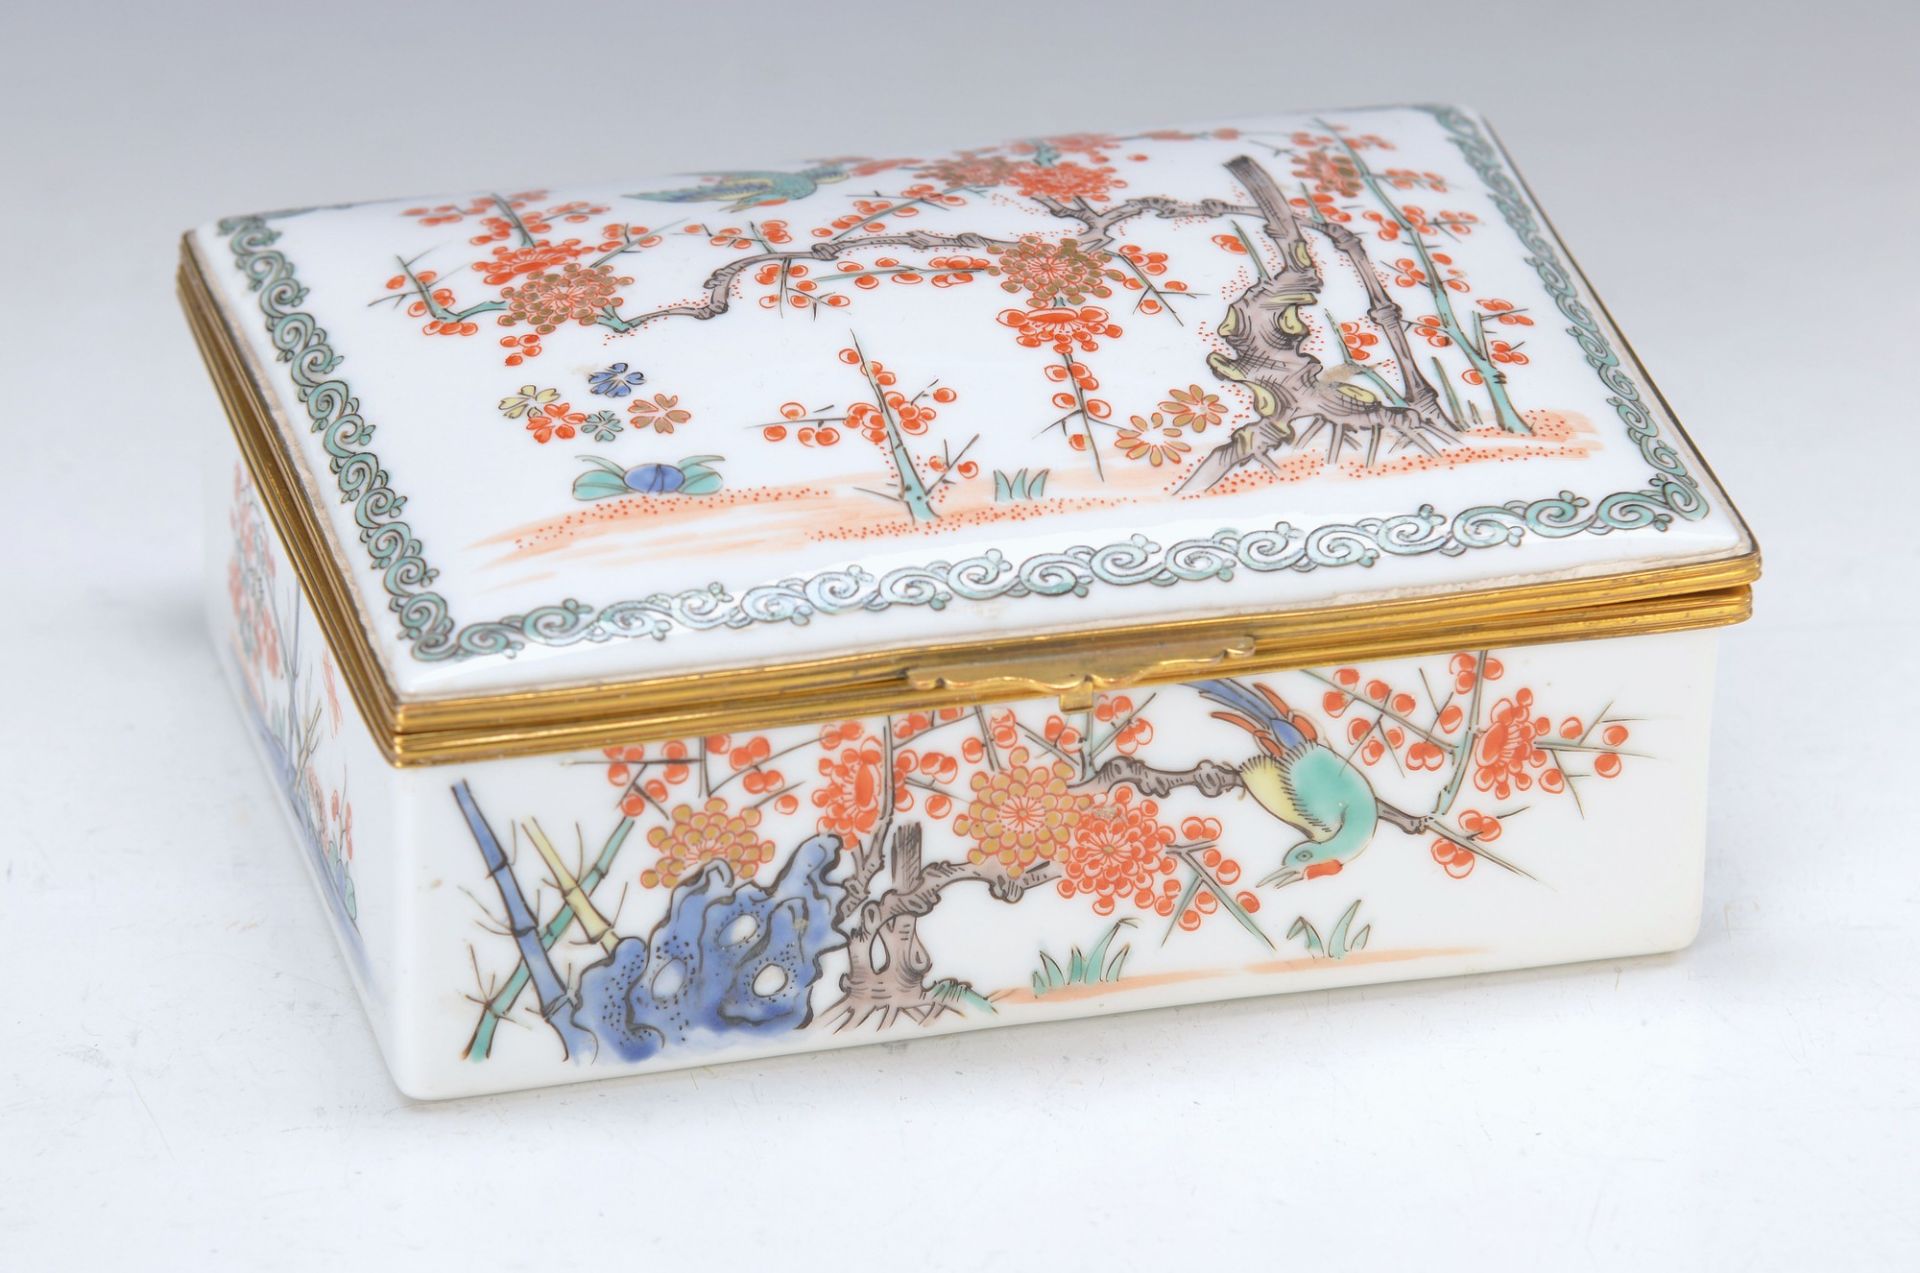 Large lid box, France, around 1880, porcelain, after Chinese model, rock- and bird pattern, brass